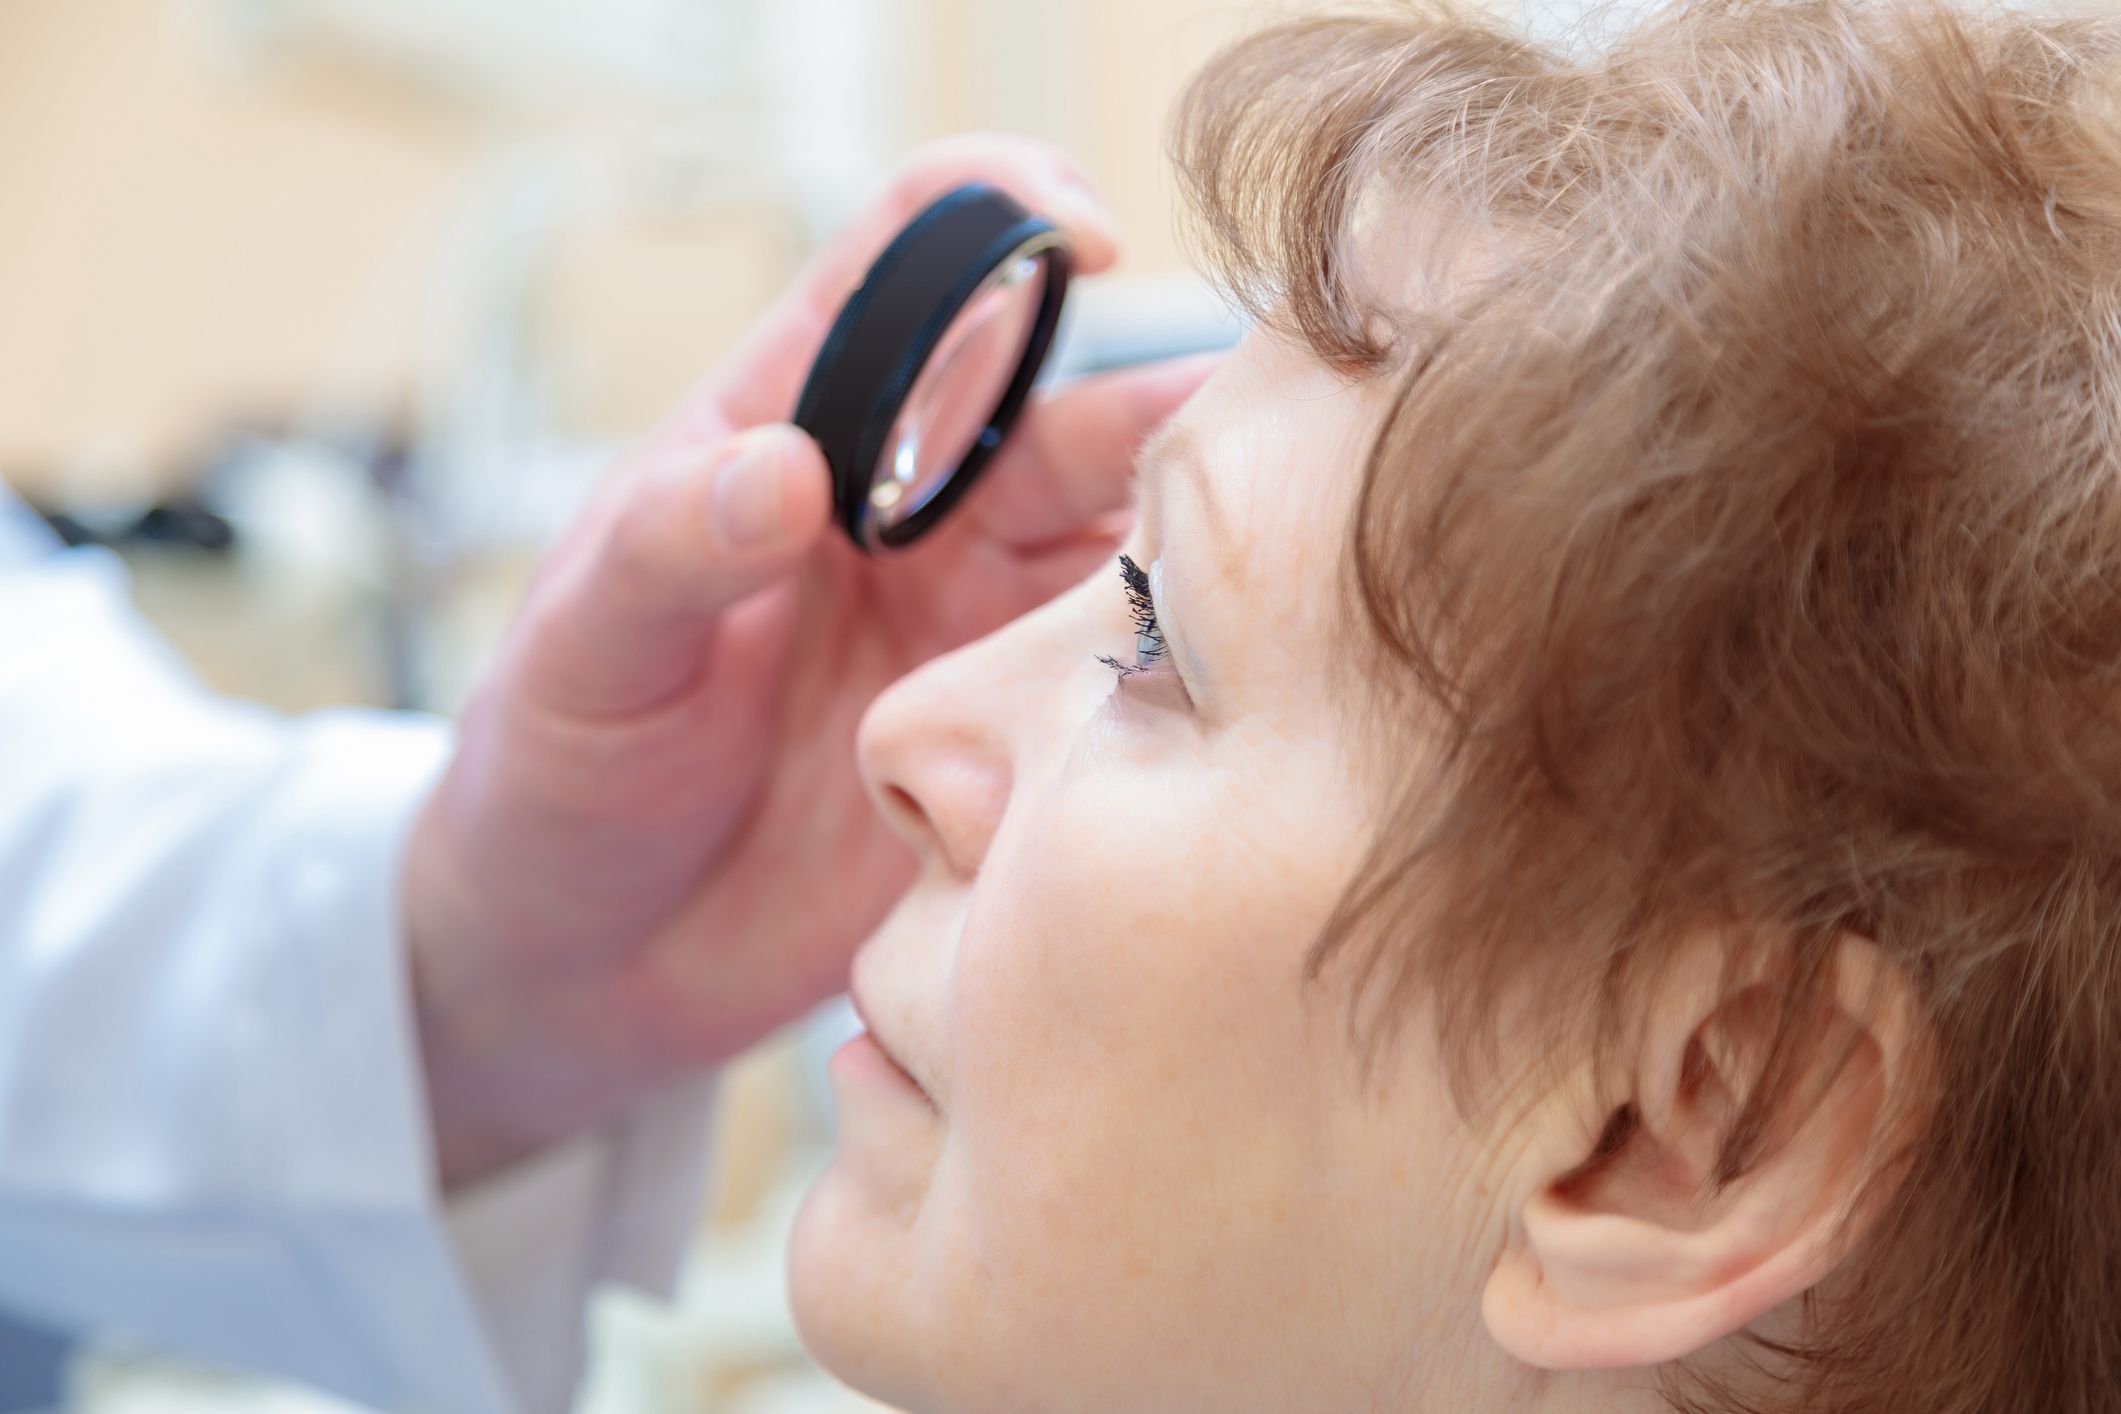 More than 2.5 million Canadians are living with cataracts, making it one of the most common aging eye conditions.  